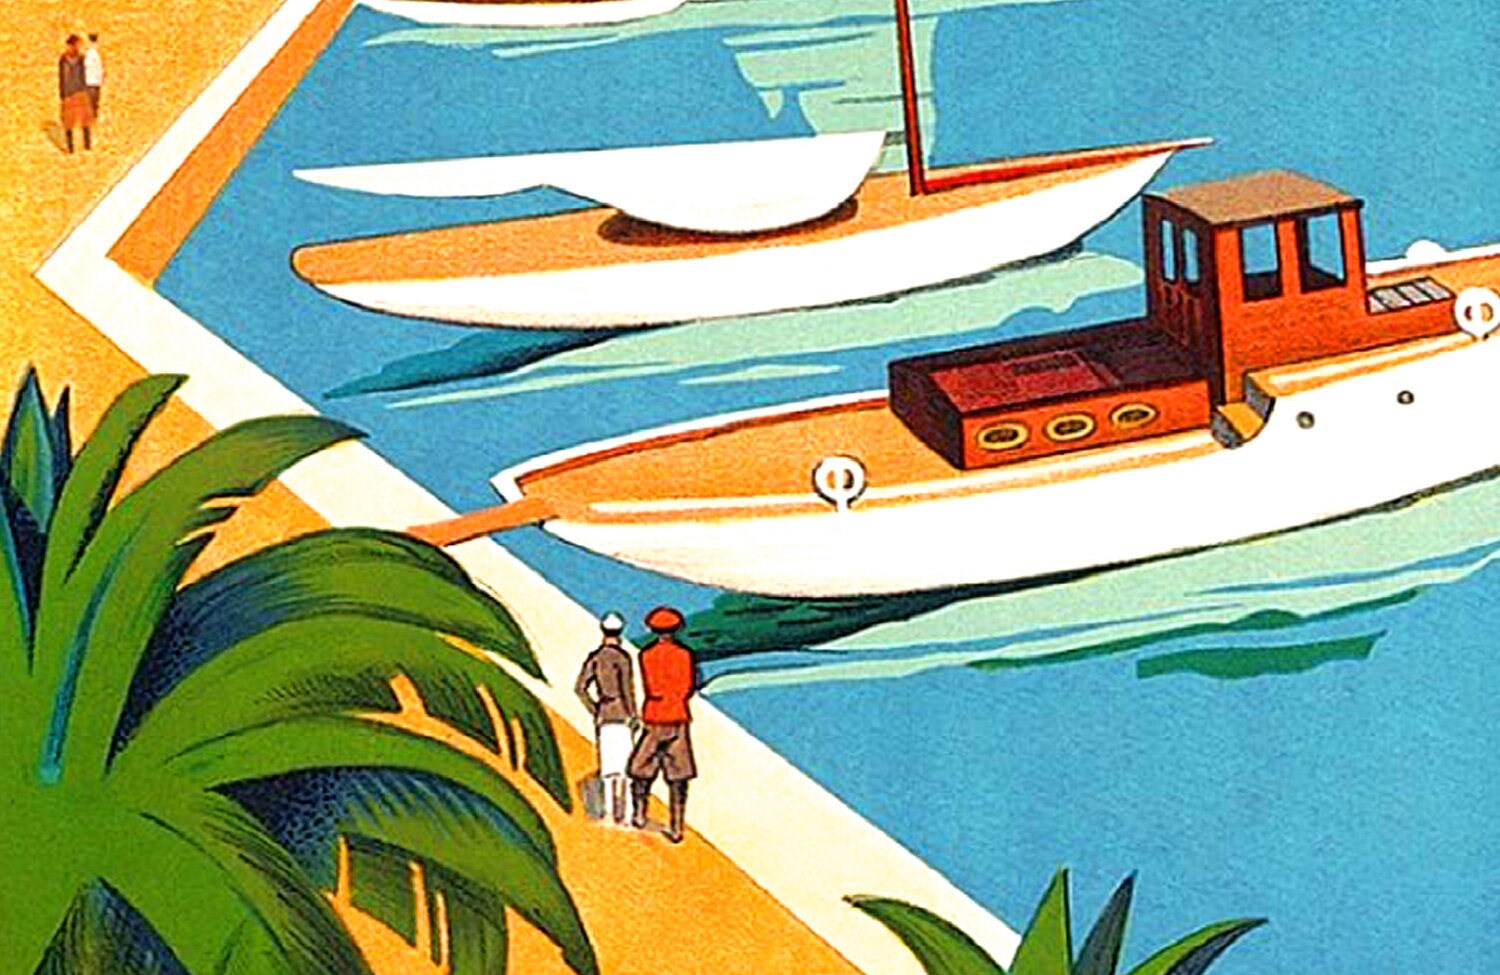 Tropical Roger 313 Etsy Beach Print St Art Caribbean Travel Broders Poster - Repro Barts